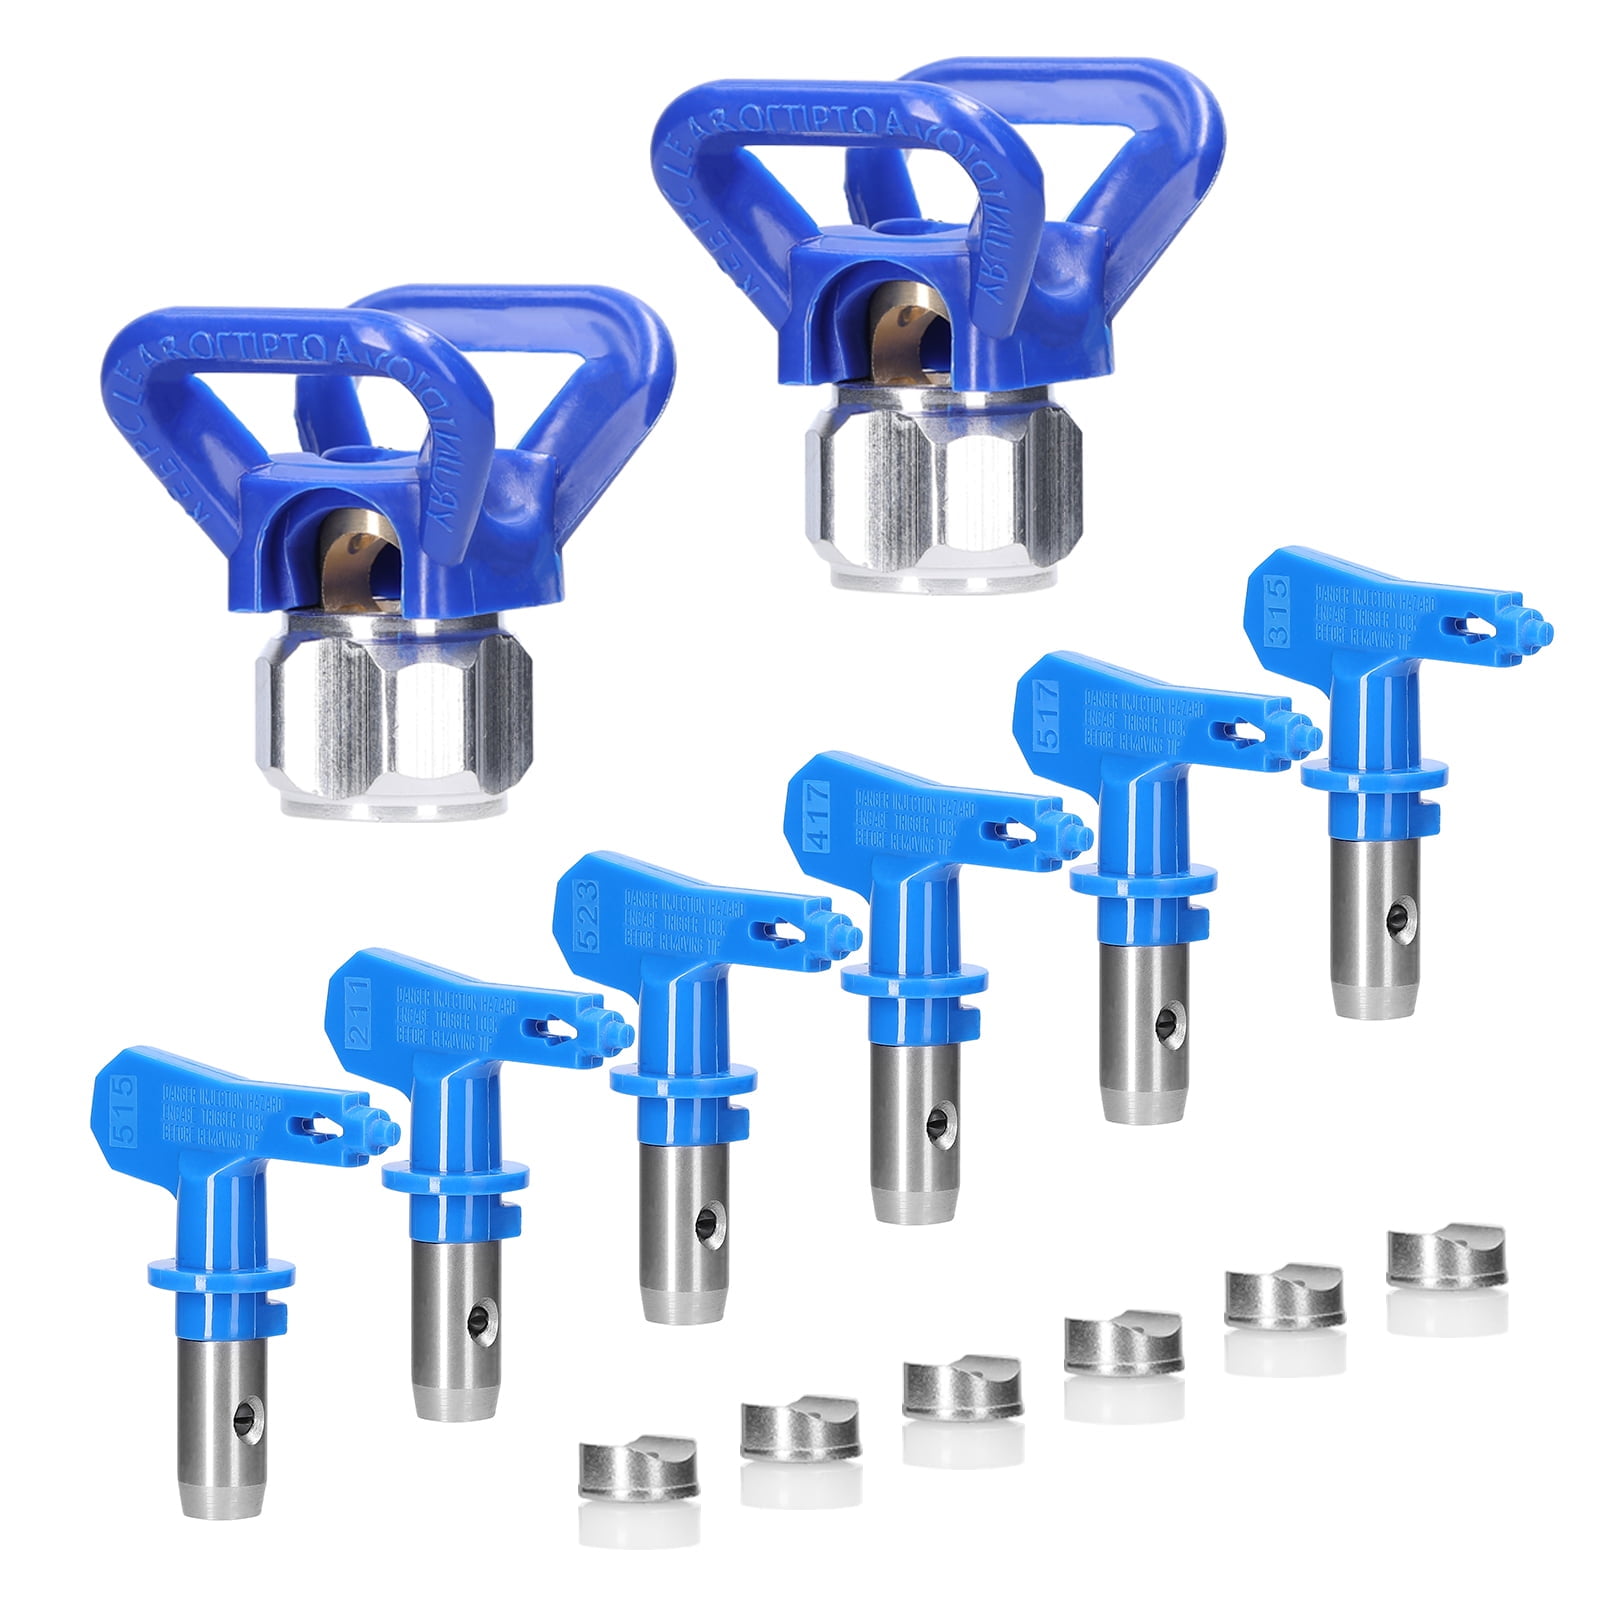 Graco Airless Paint Sprayer Accessories, Bolair Store